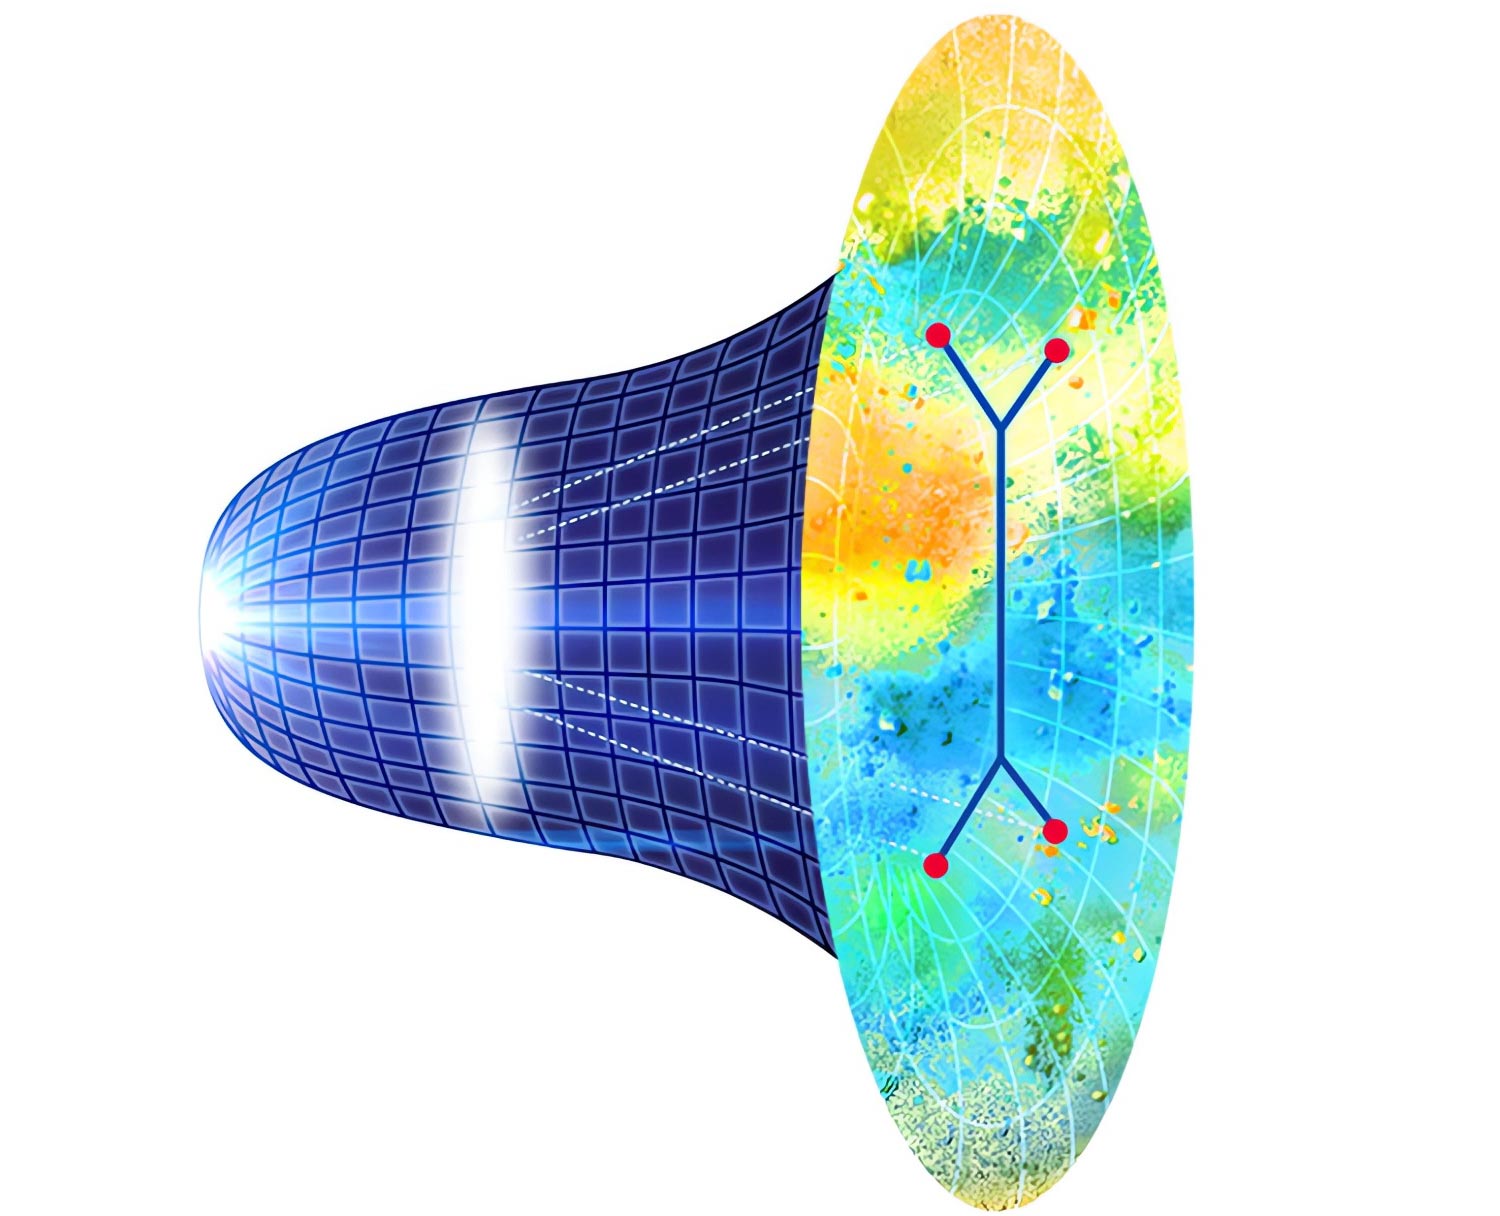 Mapping of the various theories related to the quantum field